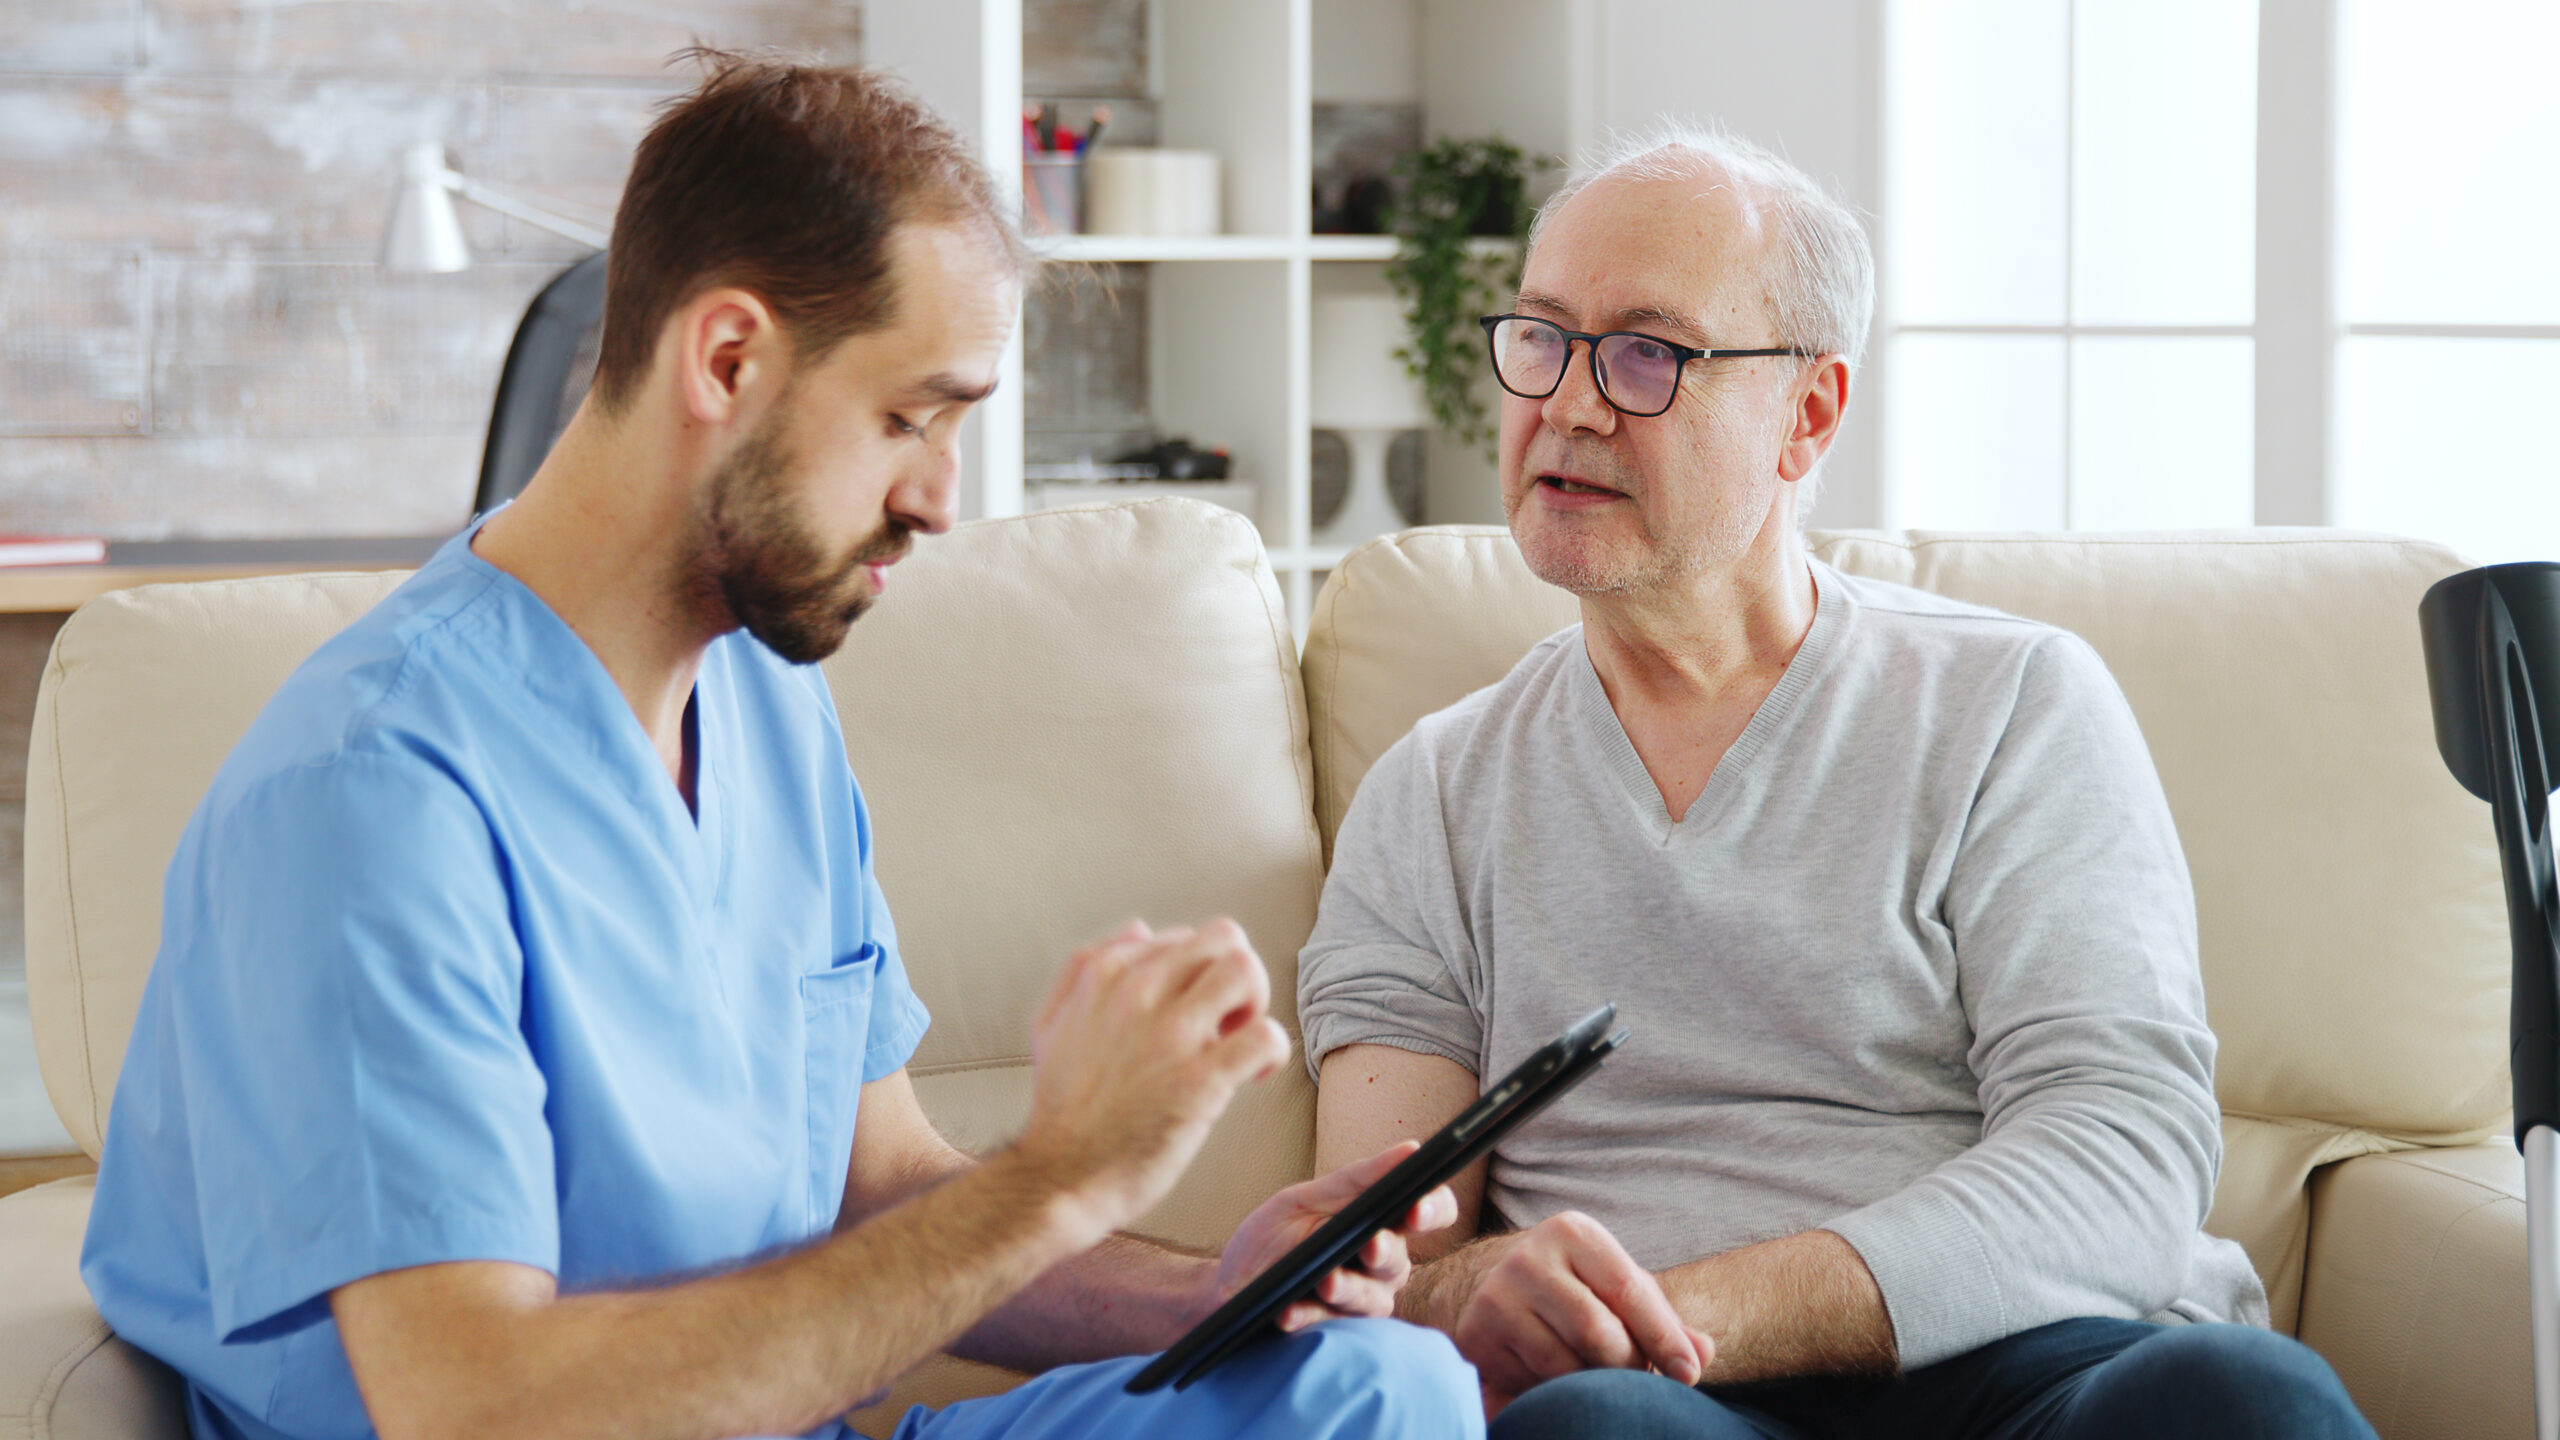 Tech Innovations That Could Help With Home Care